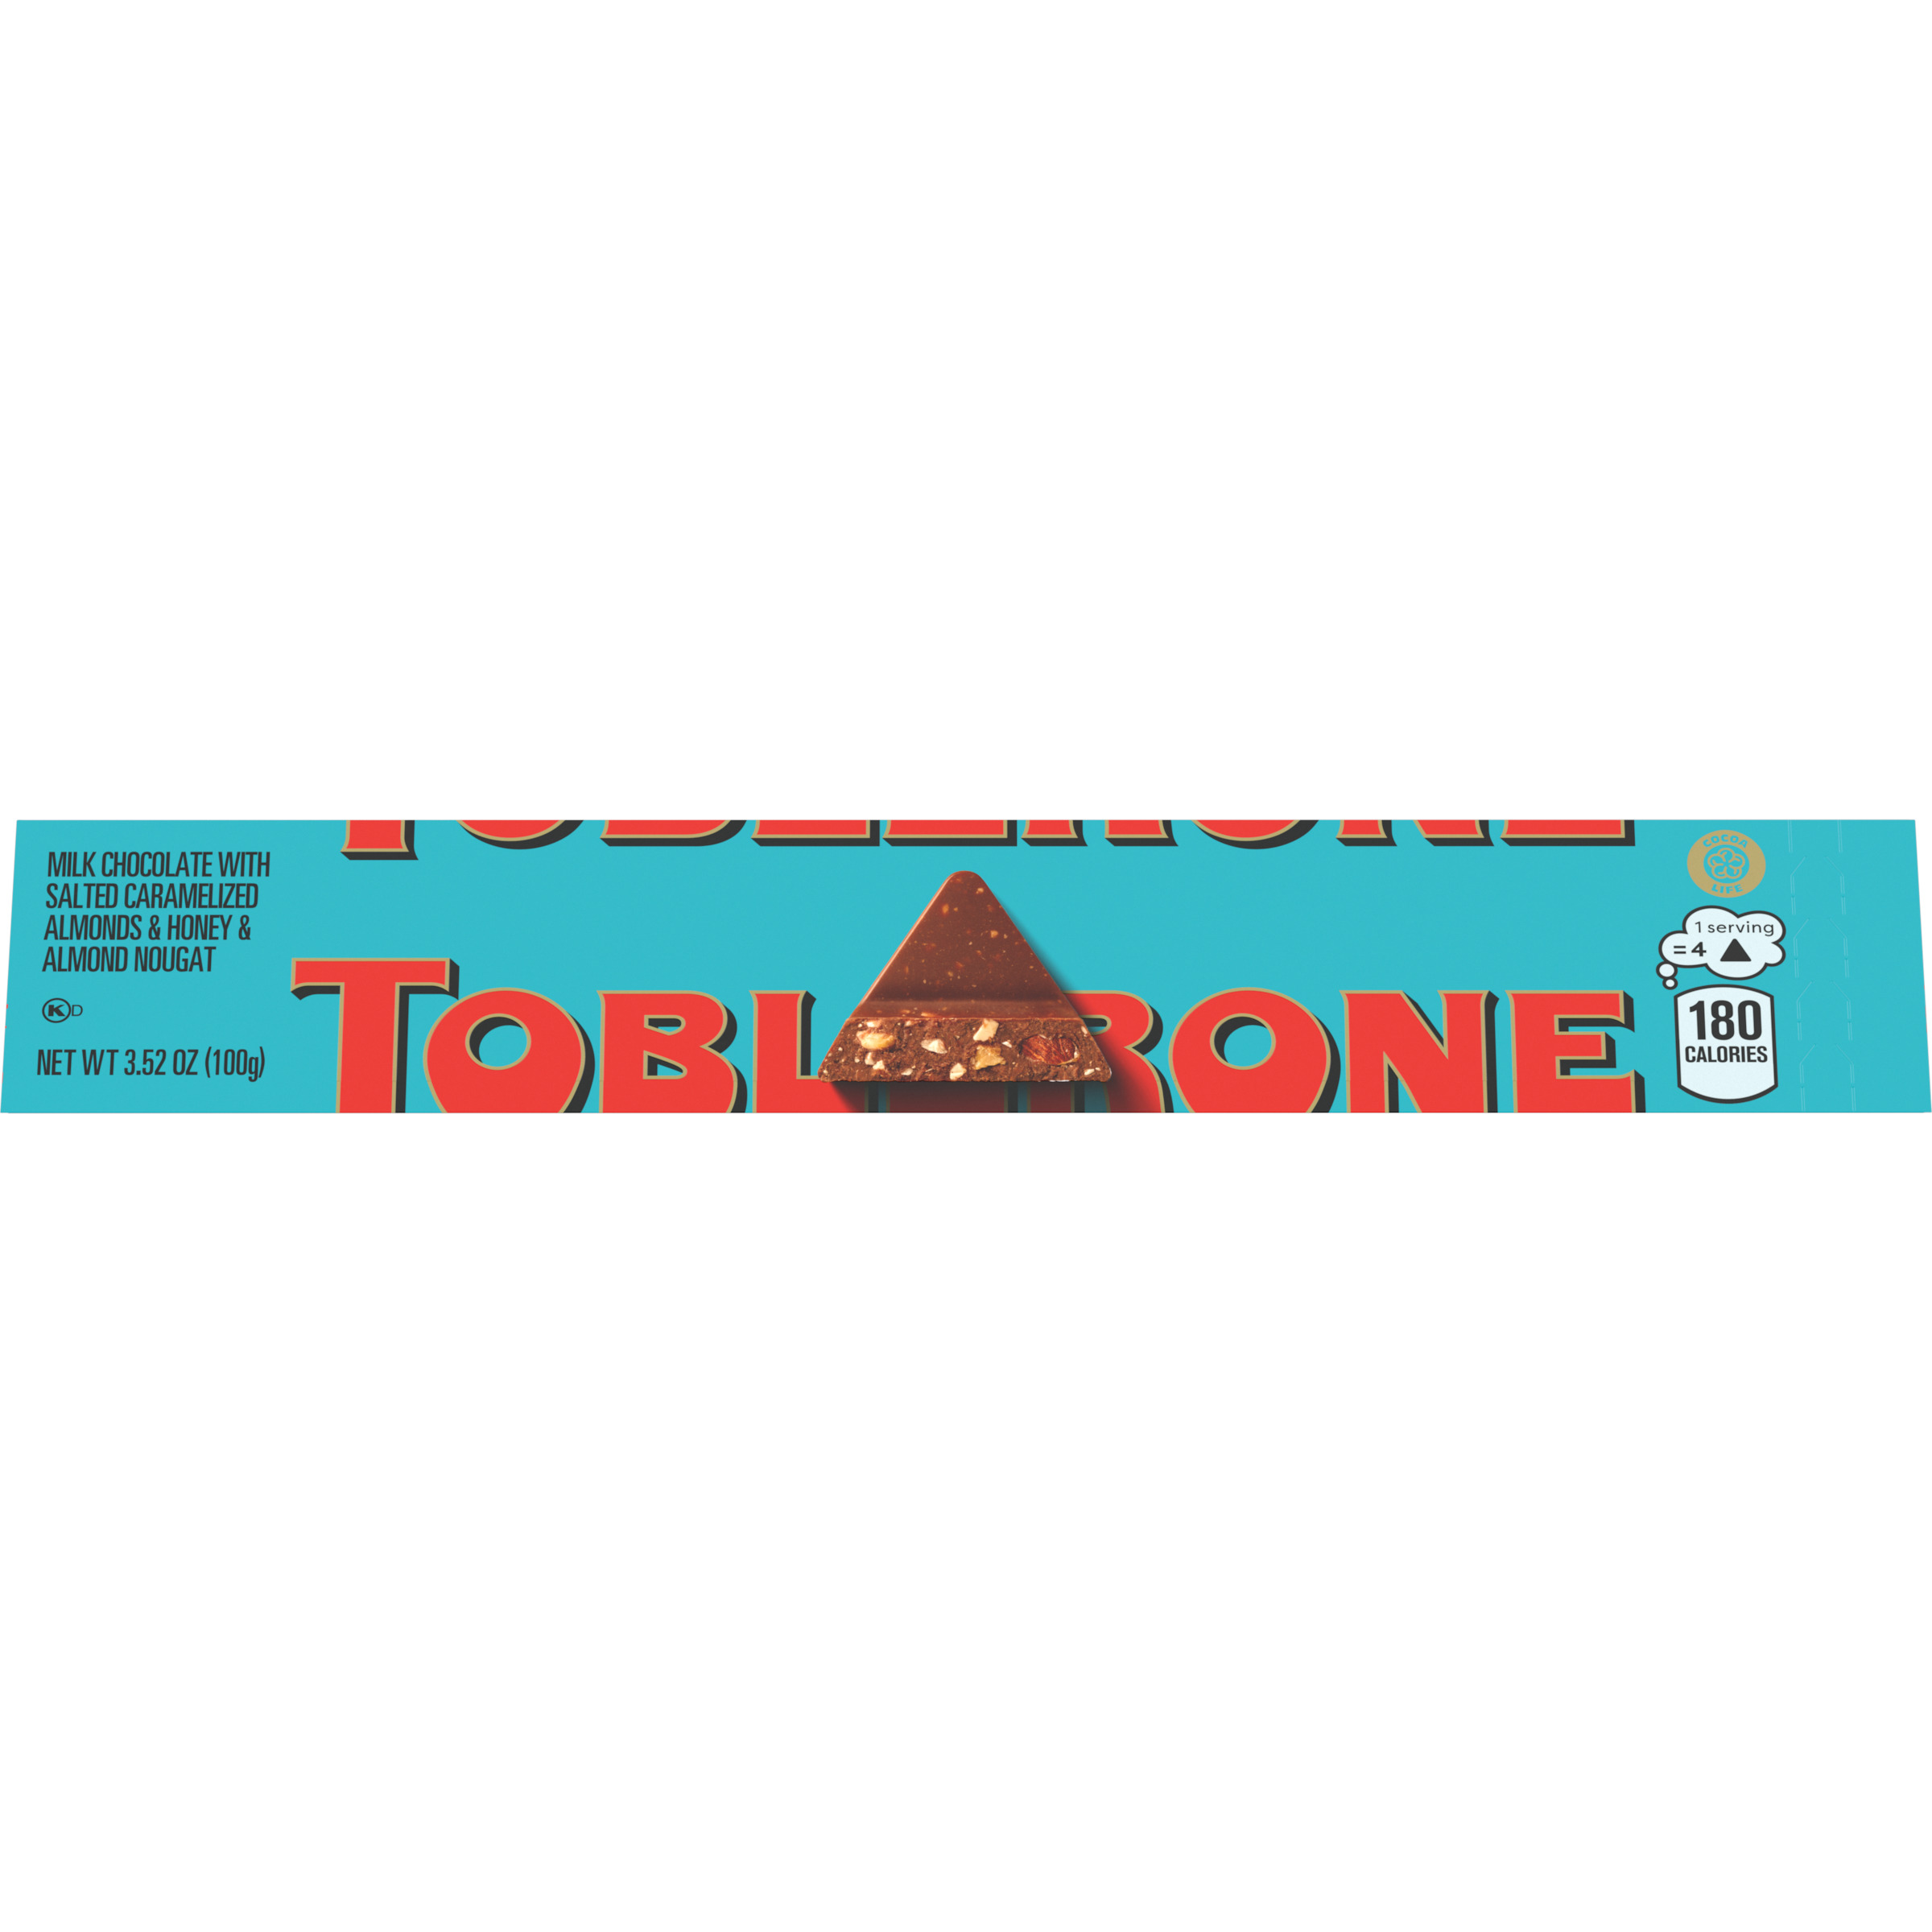 Toblerone Swiss Milk Chocolate Candy Bars with Salted Caramelized Almonds and Honey and Almond Nougat, 3.52 oz Bar-3